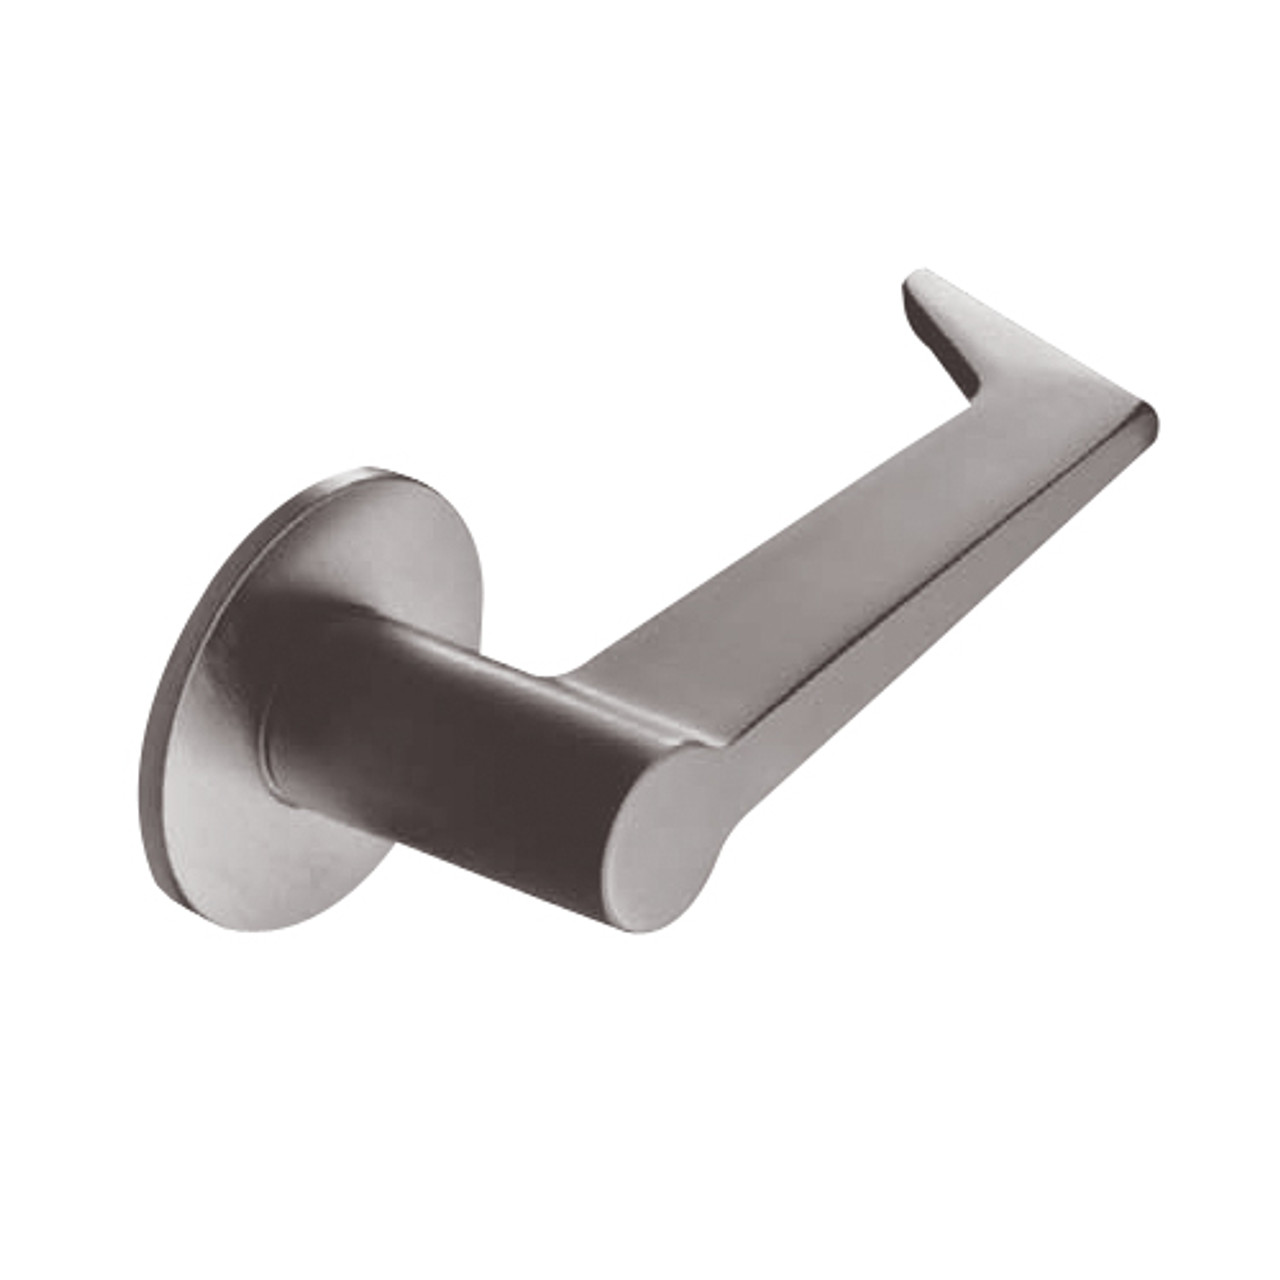 ML2059-ESA-630-M31 Corbin Russwin ML2000 Series Mortise Security Storeroom Trim Pack with Essex Lever in Satin Stainless